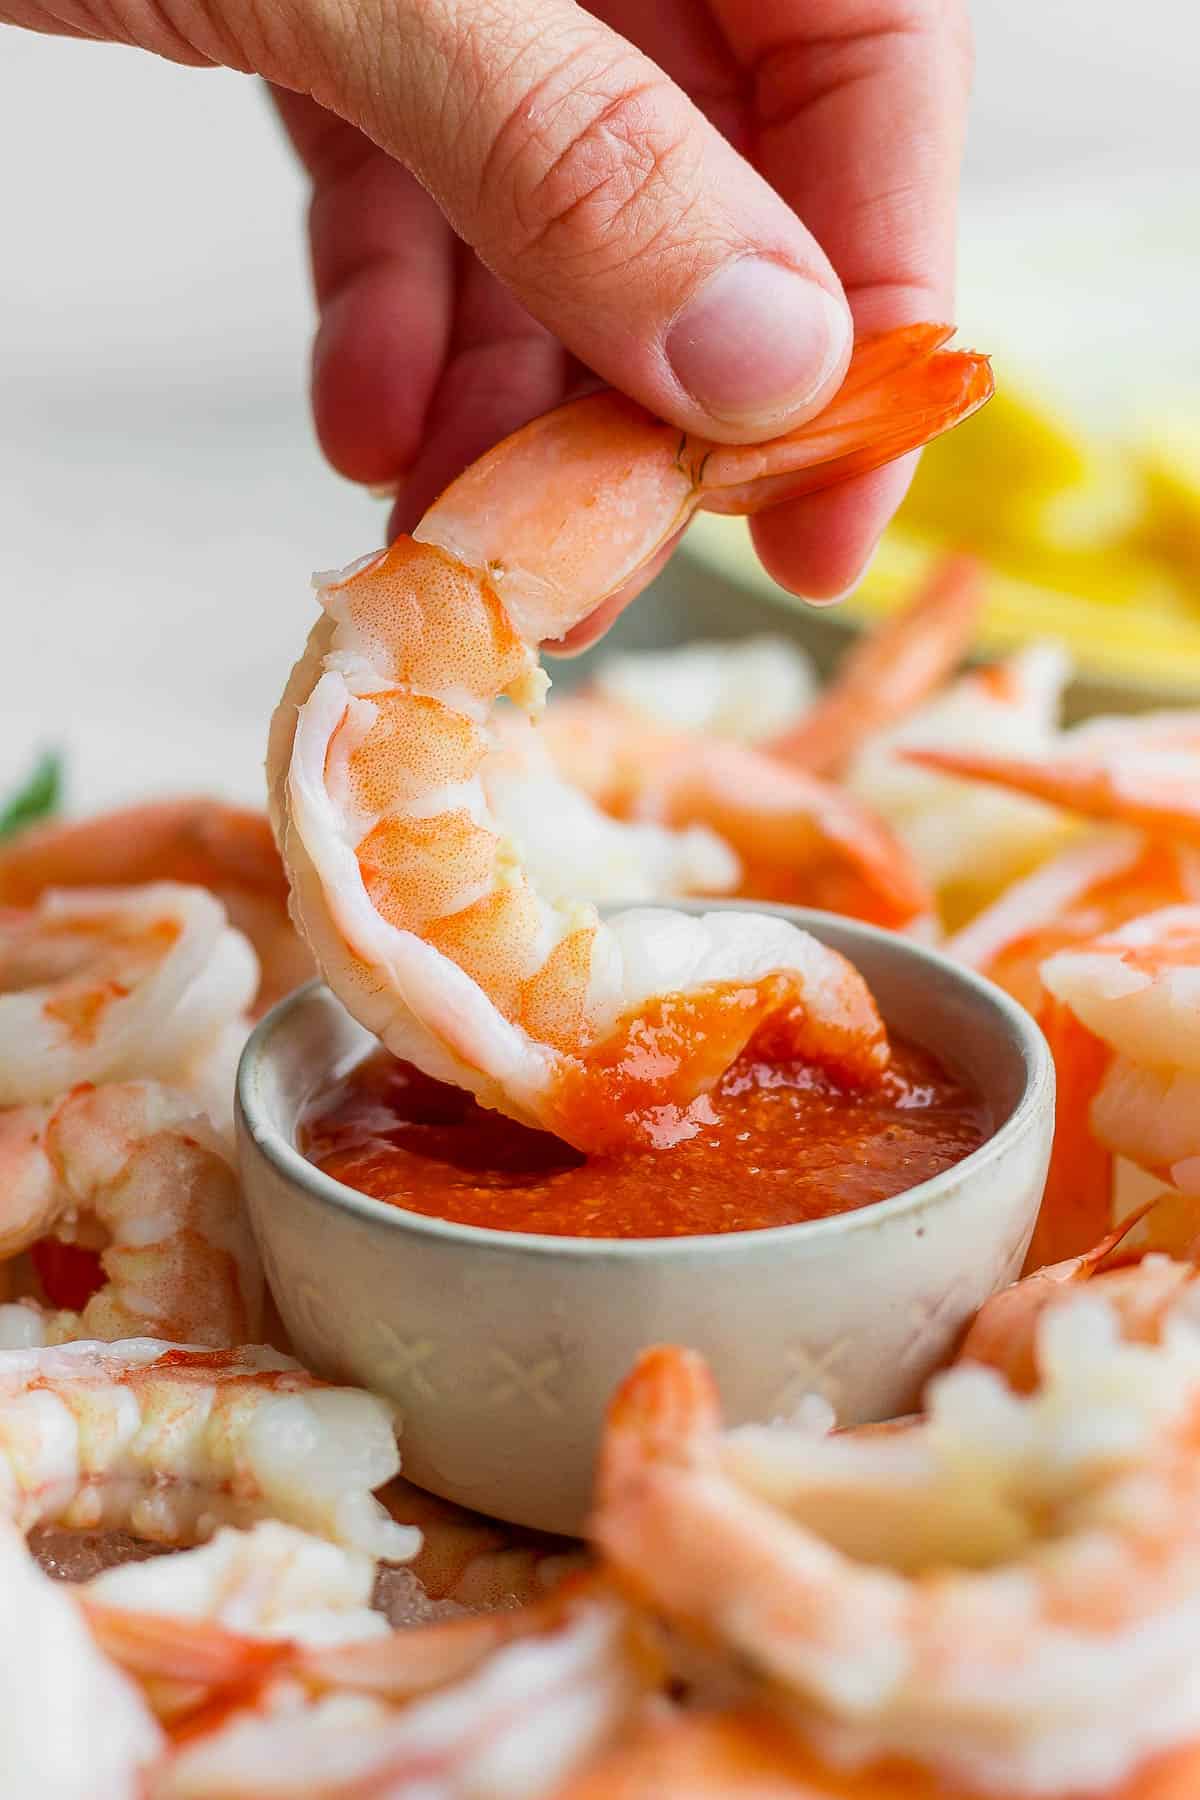 A hand dipping a shrimp into the cocktail sauce.